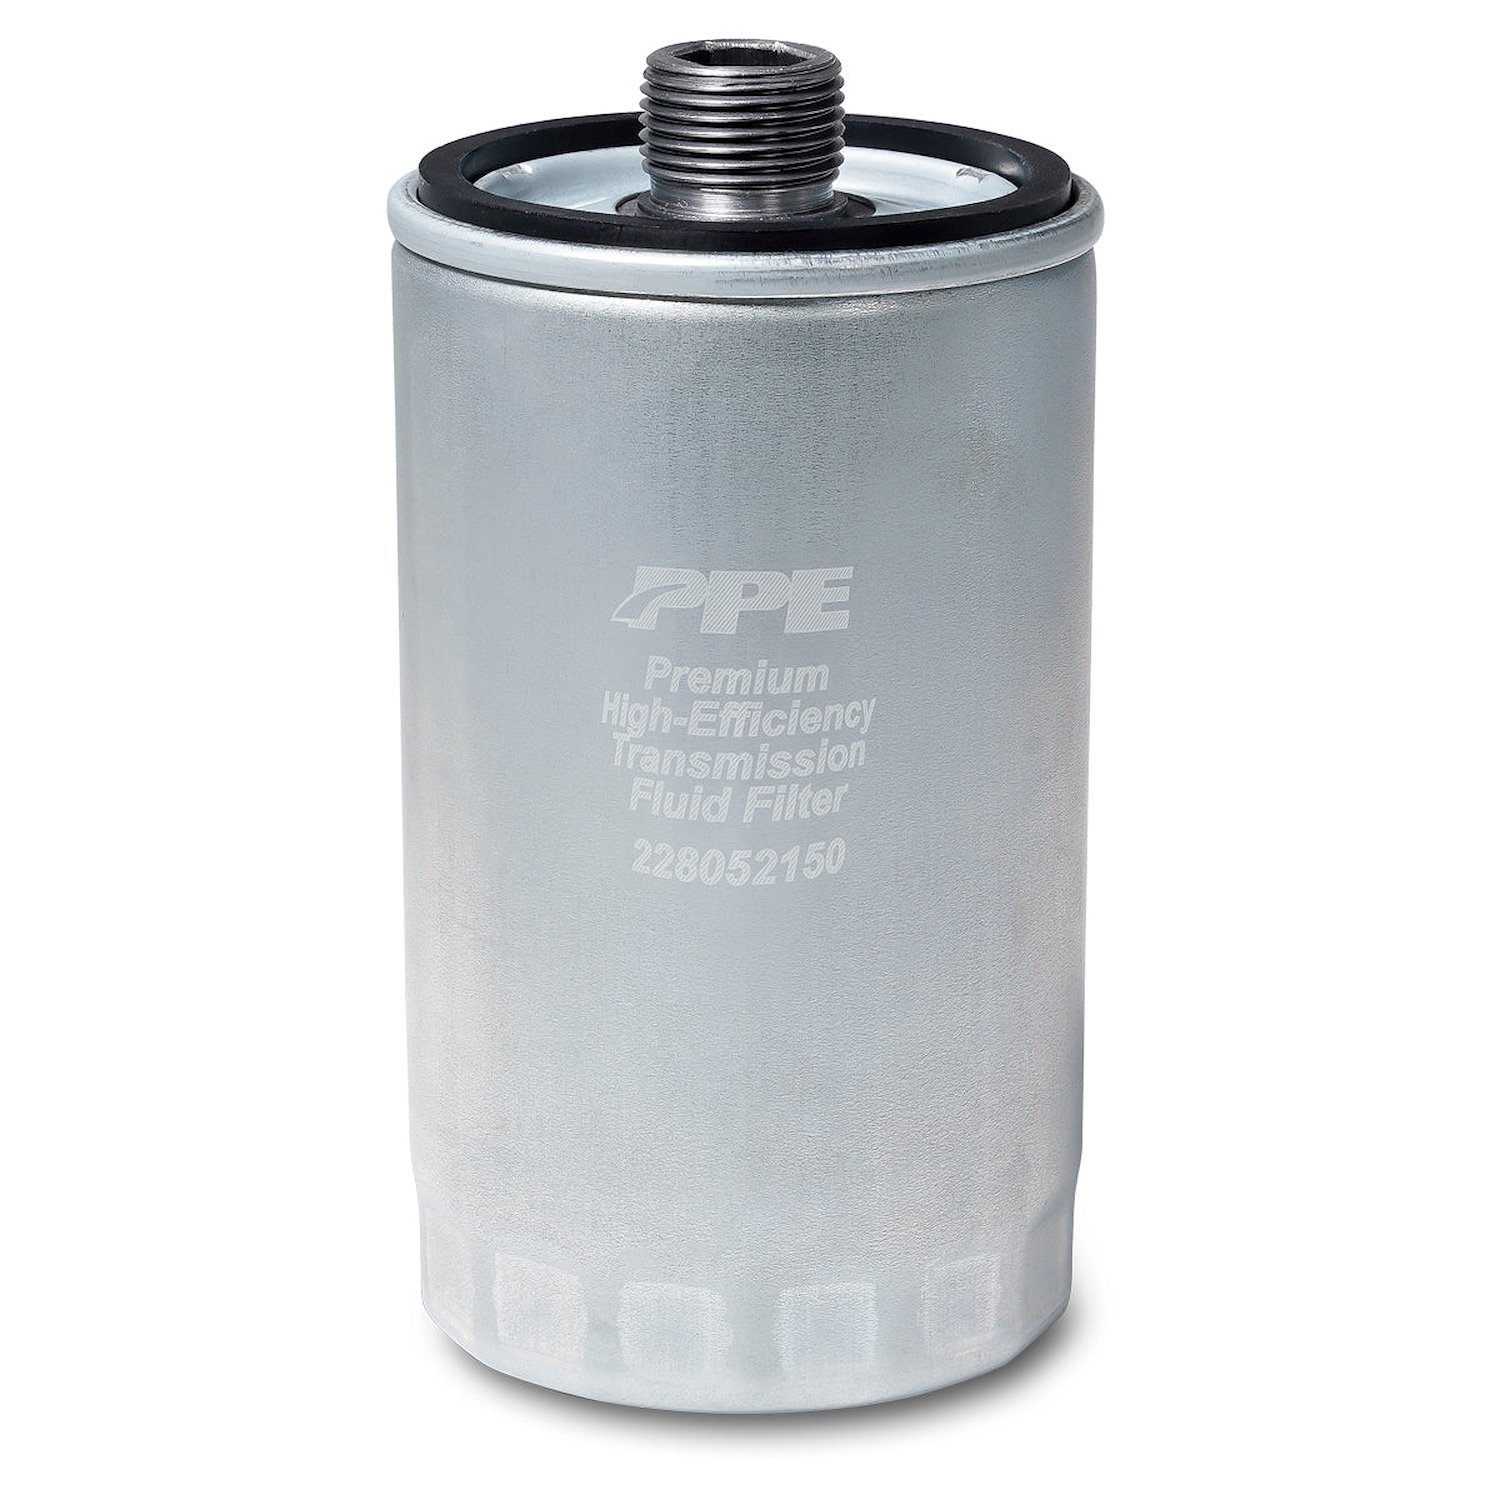 228052150 Filter Trans Fluid 68RFE Spin-On (Requires PPE